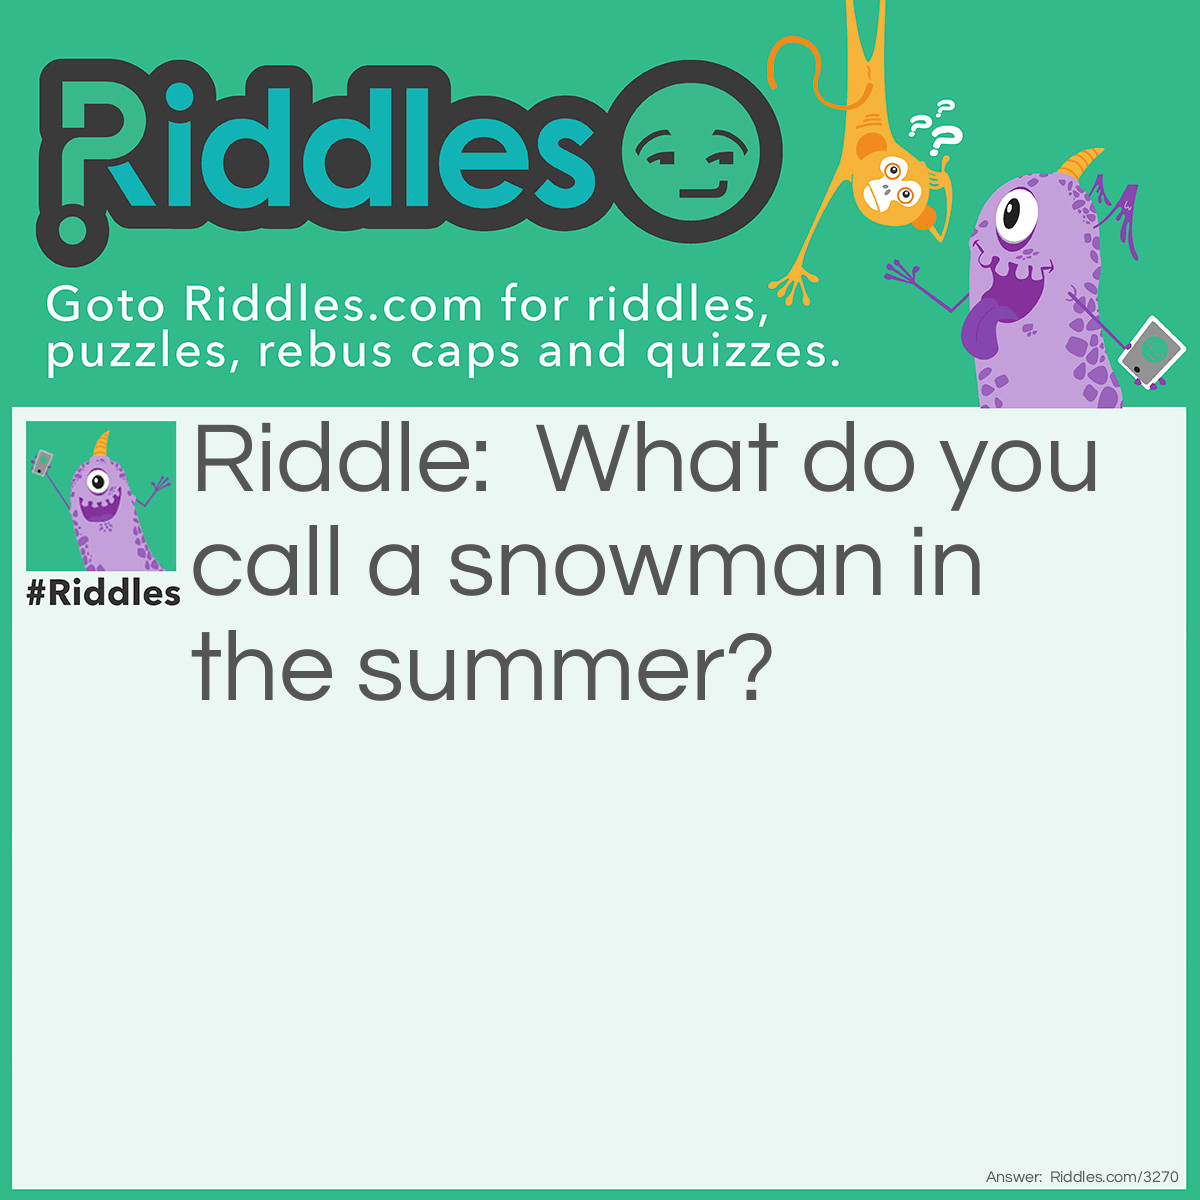 Riddle: What do you call a snowman in the summer? Answer: Puddle.